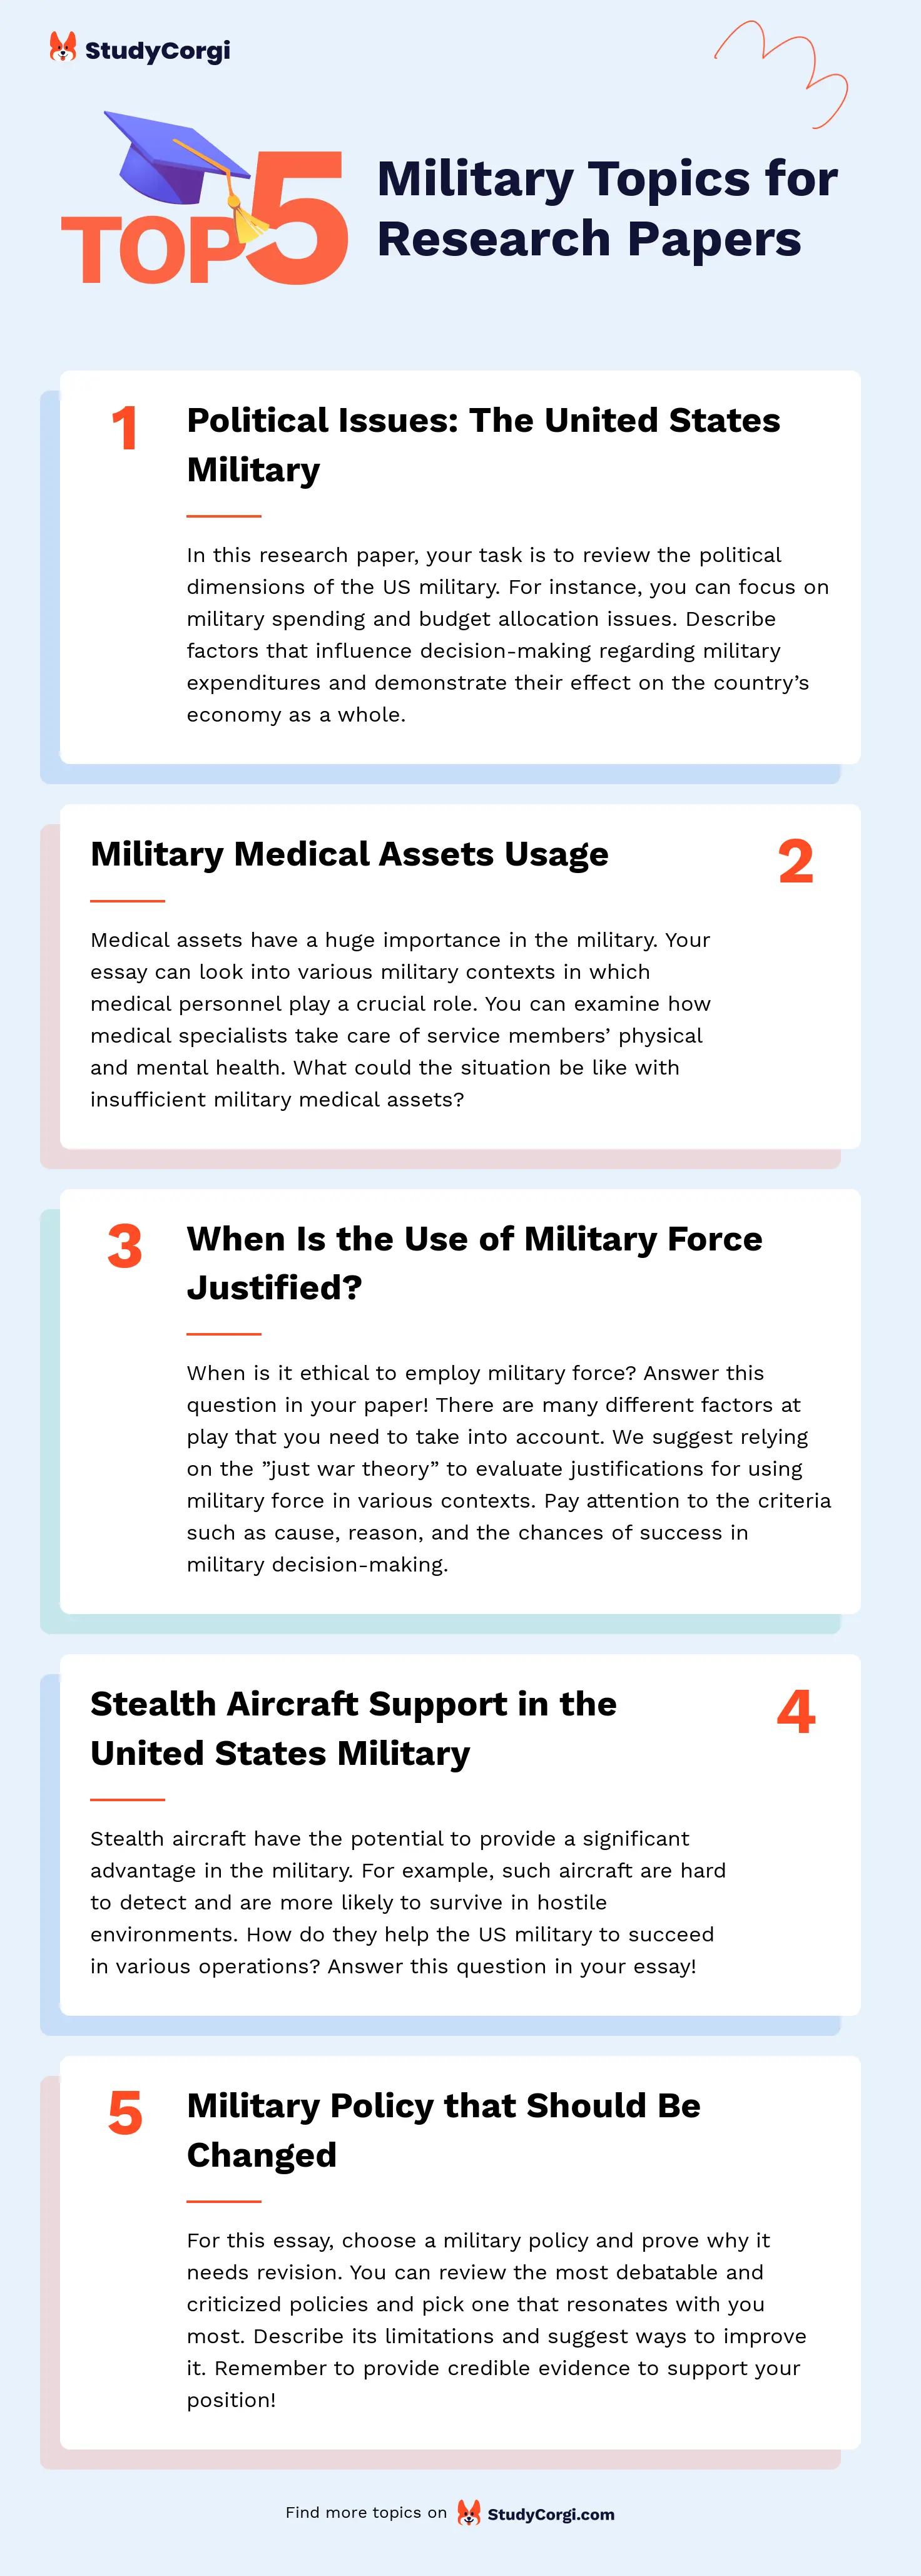 TOP-5 Military Topics for Research Papers